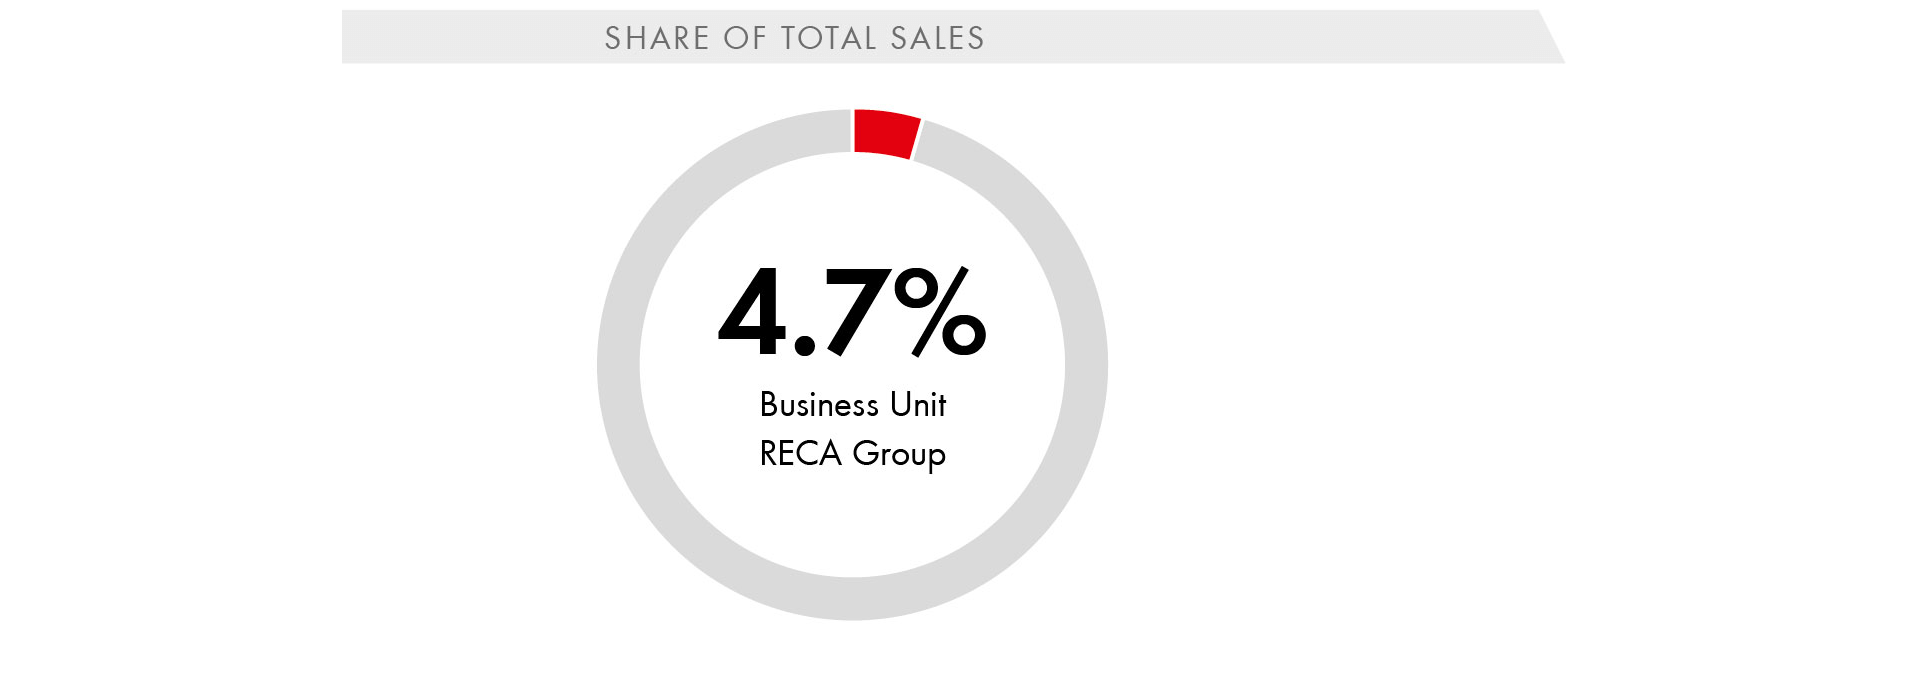 Share of total sales